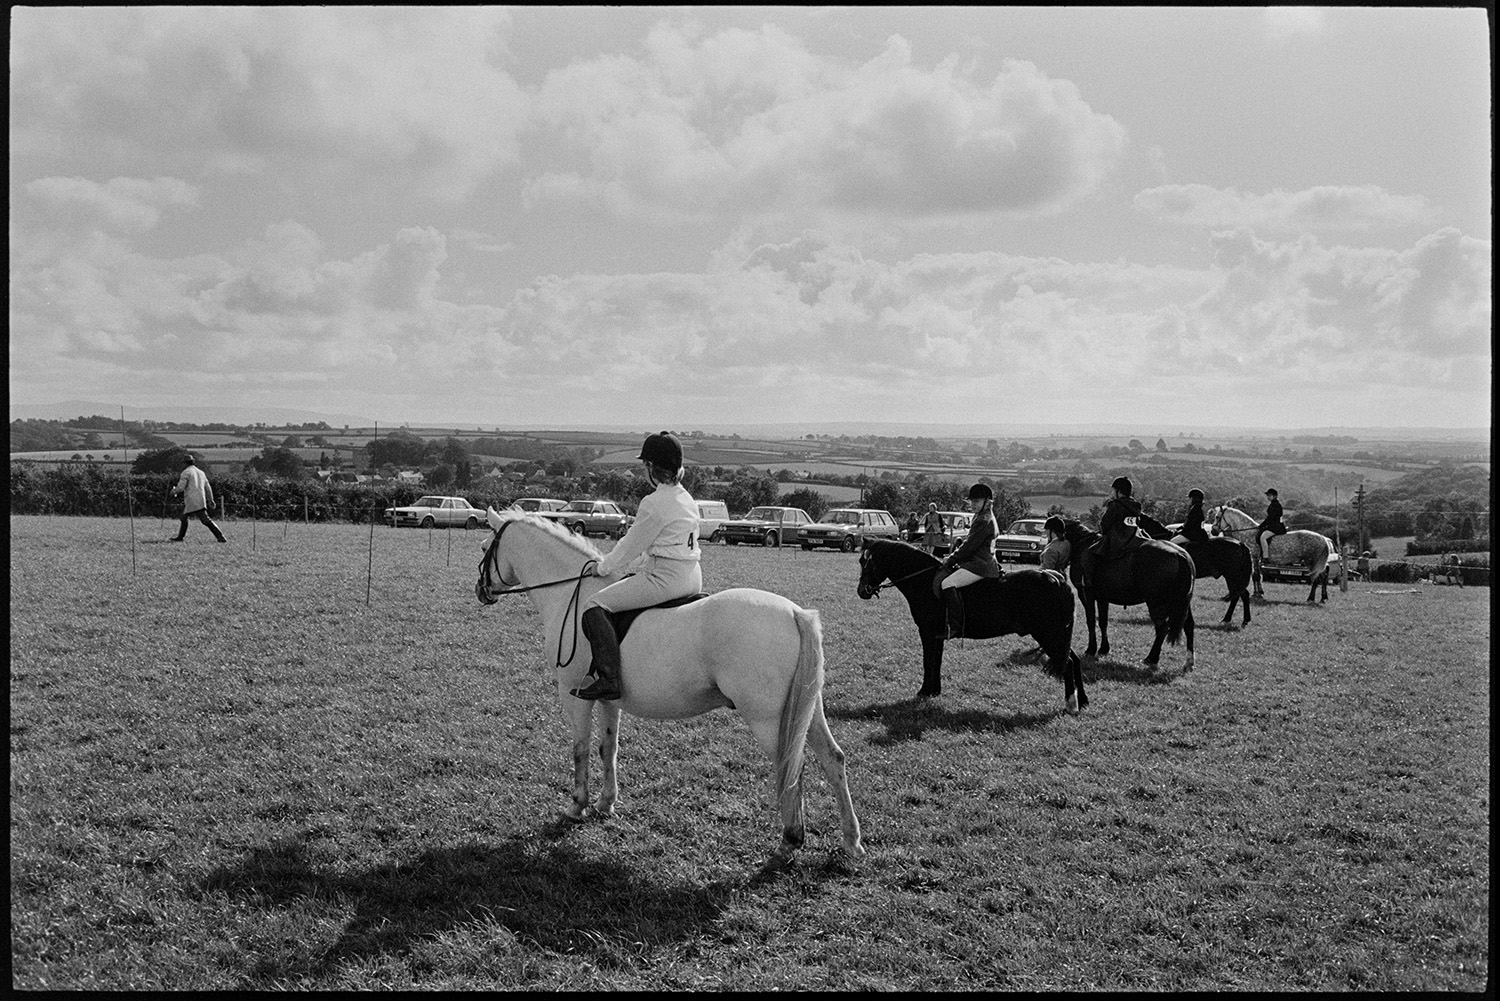 Horses and riders at gymkhana. 
[Mounted horse riders lined up ready to compete in an event at Dolton Gymkhana. Parked cars can be seen in the field in the background.]